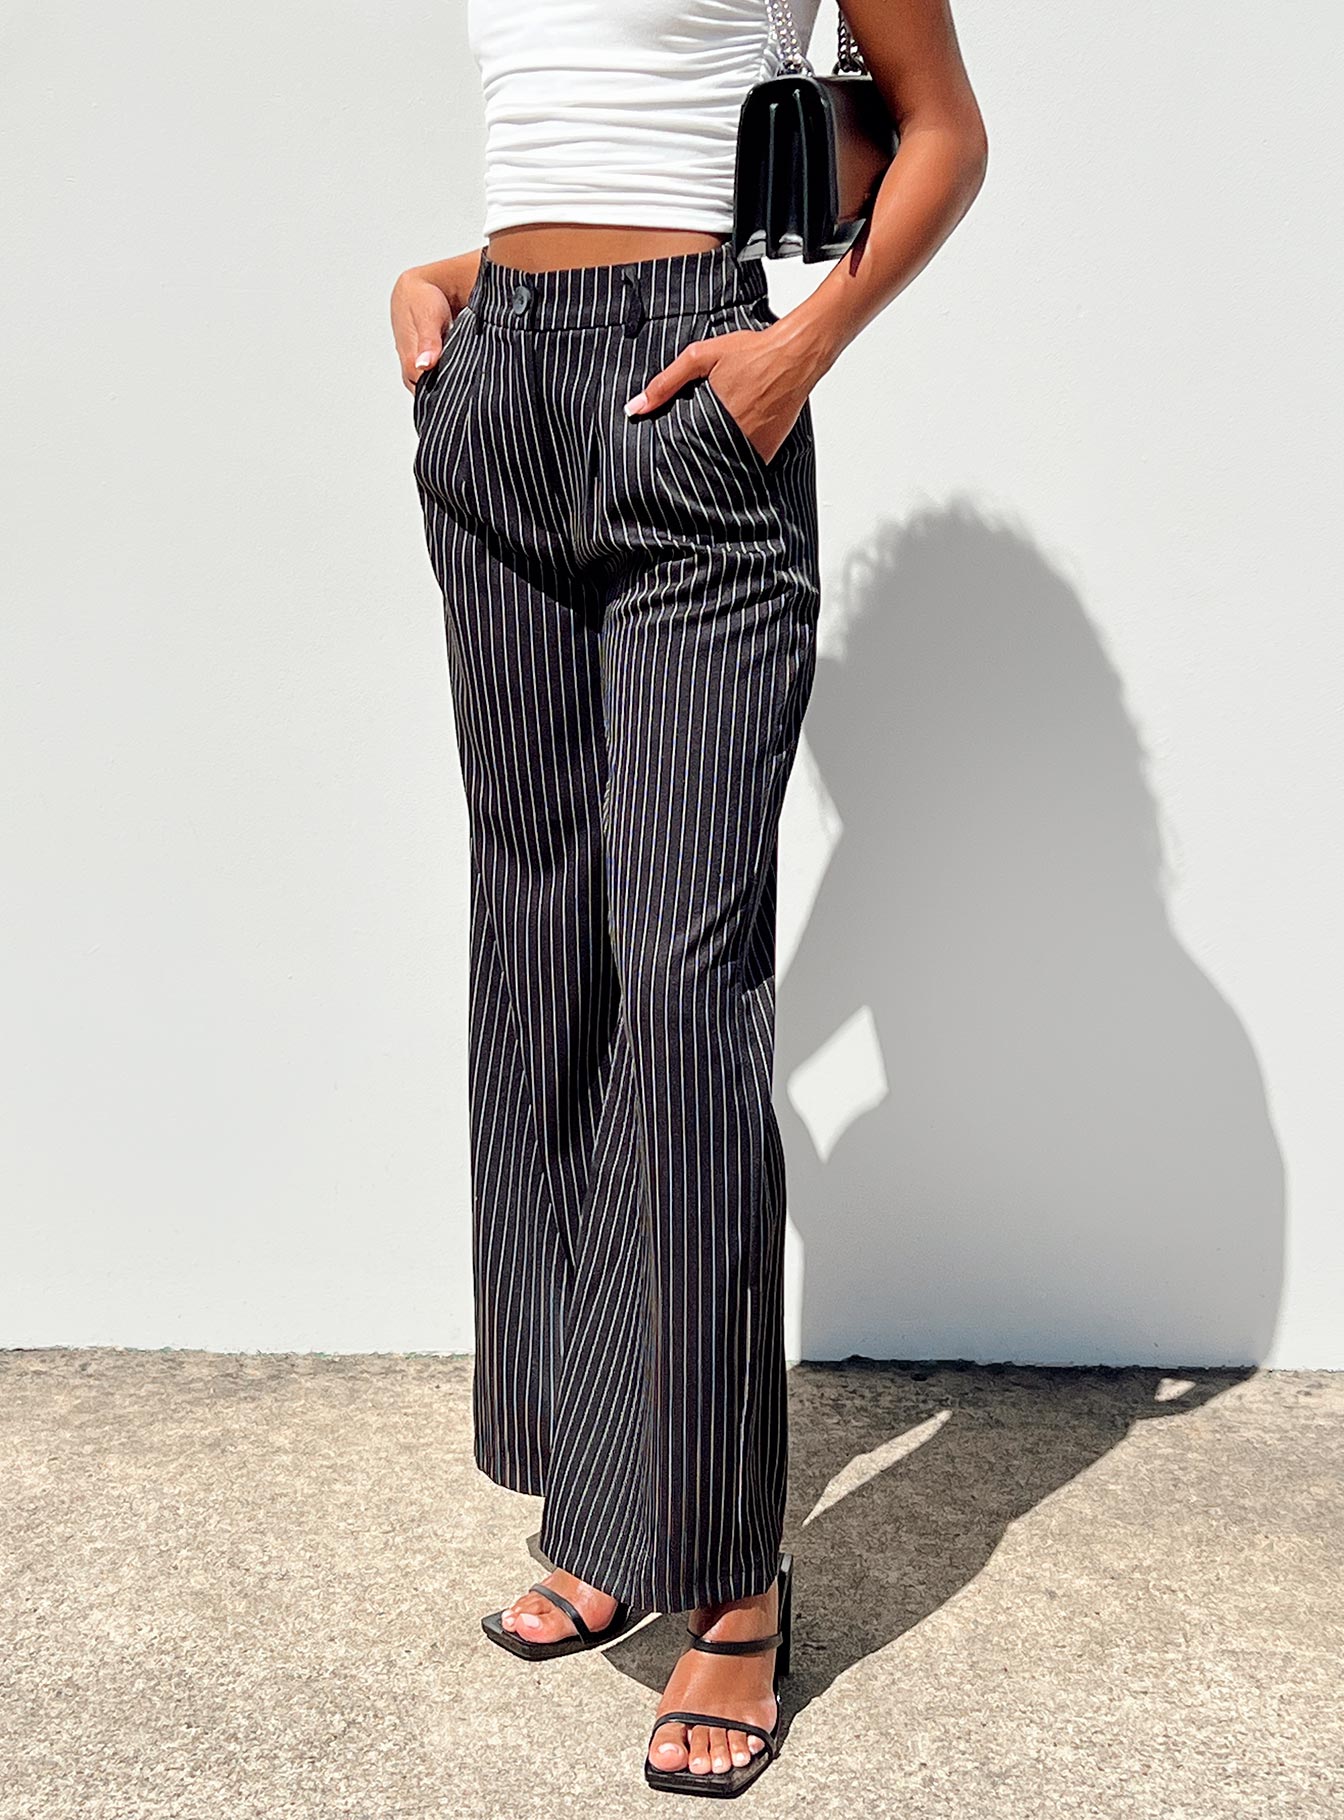 SUCHCOOL Striped Pants For Women Y2K Fashion Gothic High Waist Straight  Pants Streetwear Fashion Outfits Korean Style Trouser